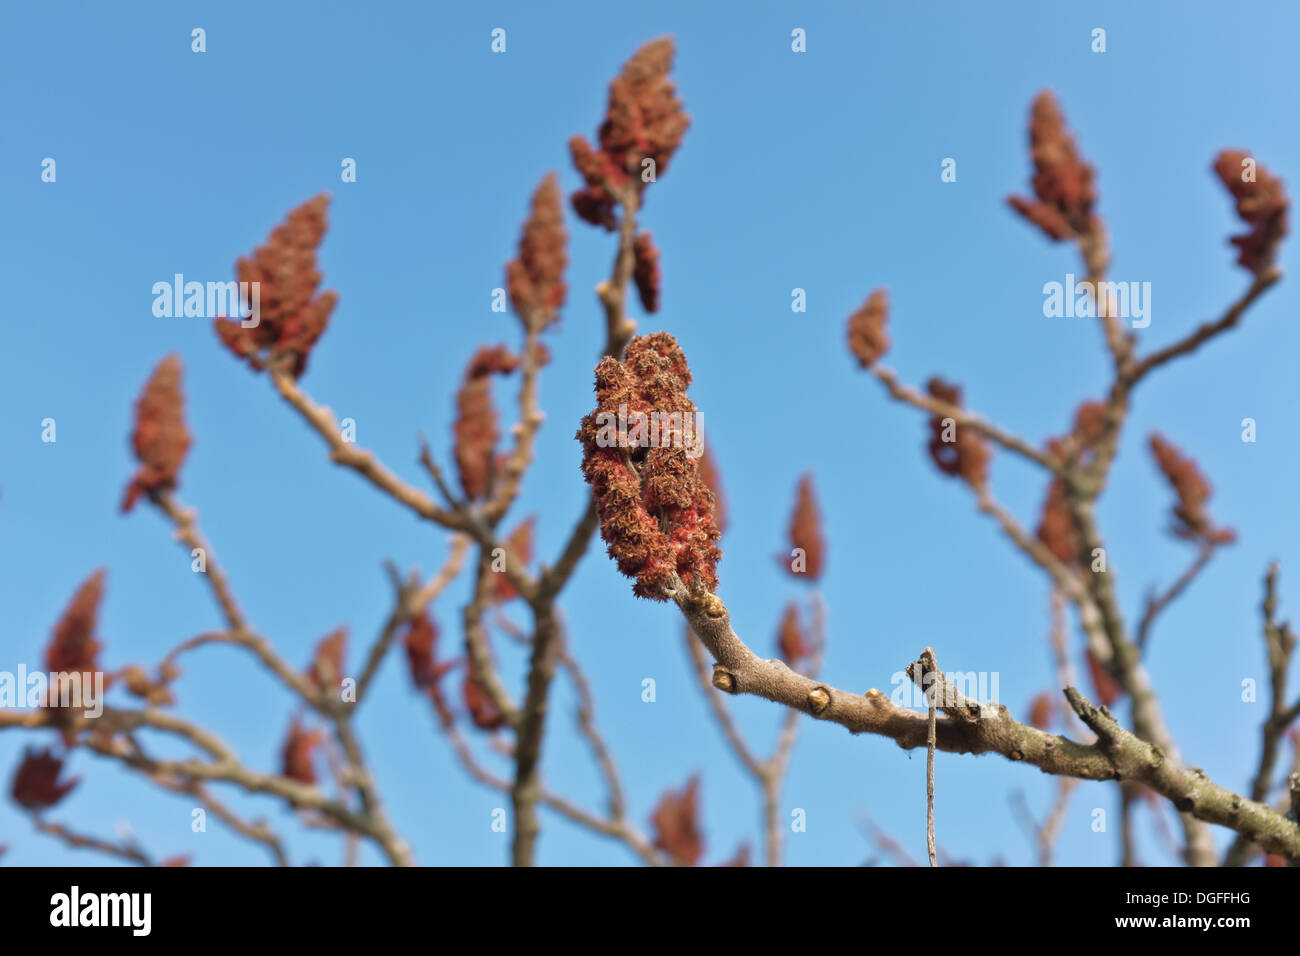 Fruit of Rhus typhina syn. R. hirta (staghorn sumac or stag's horn sumach) Stock Photo